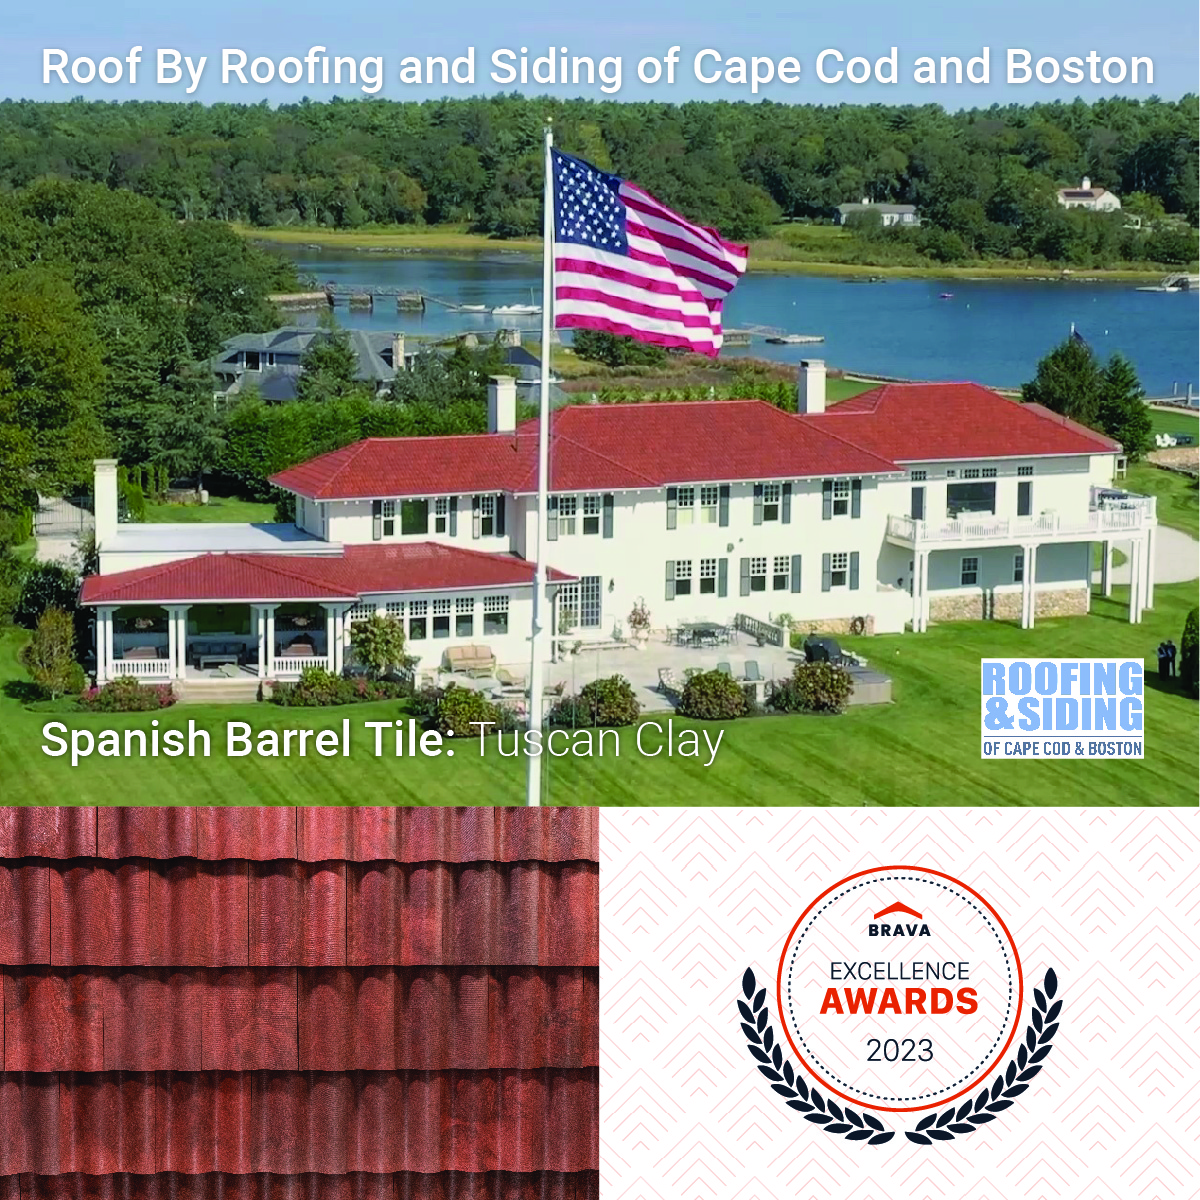 Roofing and Siding of Cape Cod, LLC 900 MA-134, South Dennis Massachusetts 02660